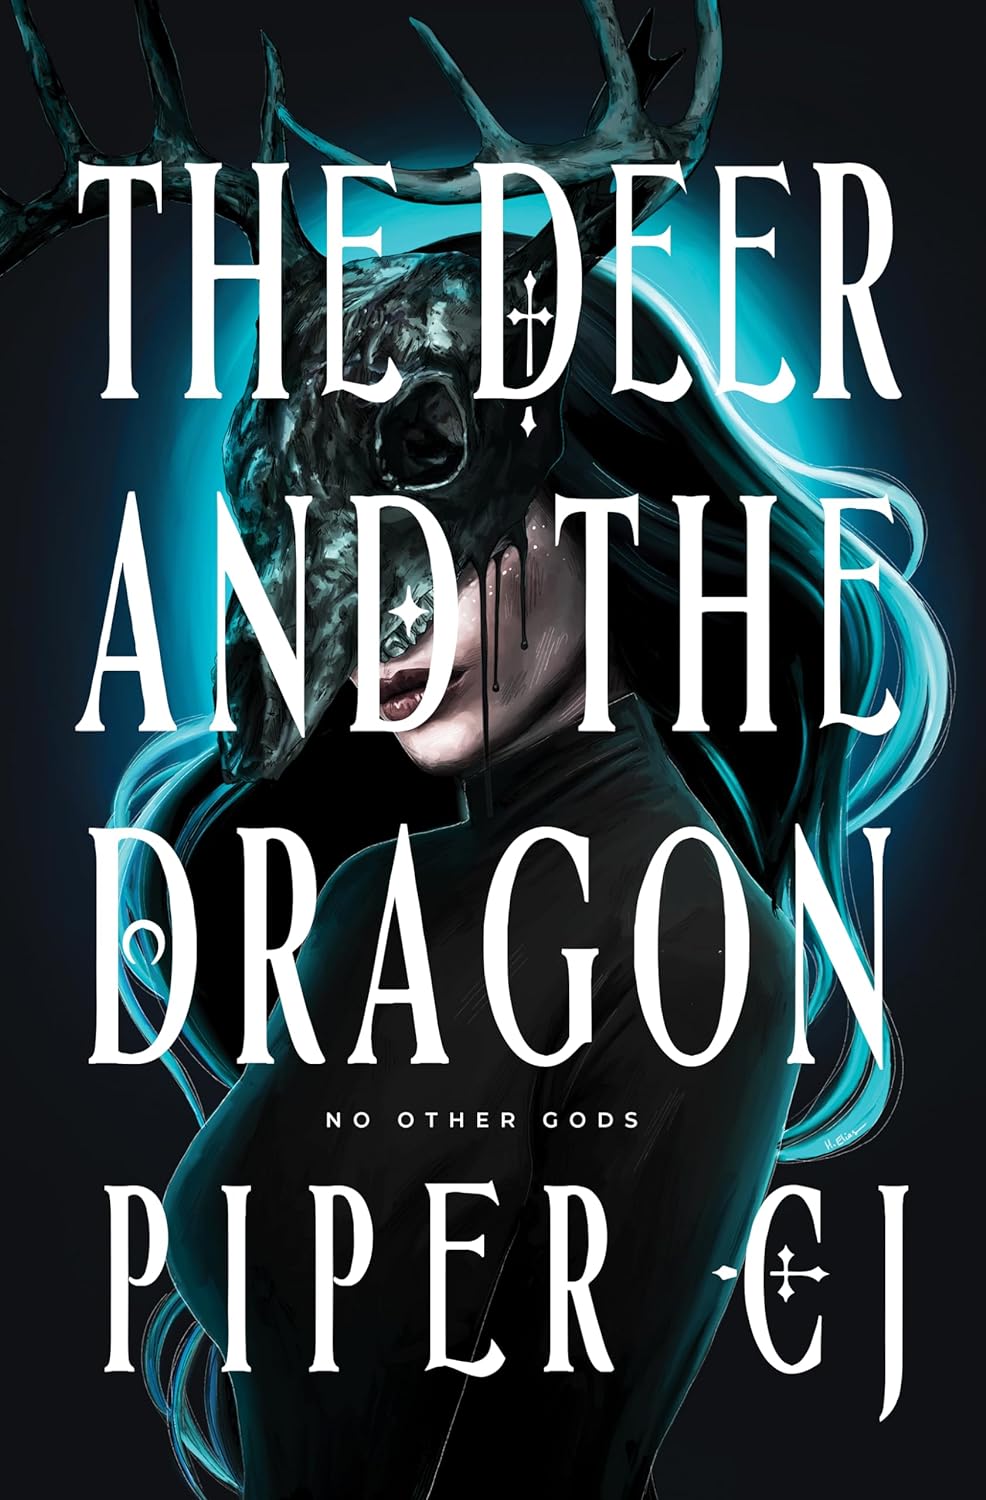 A black and blue book cover with a woman on the front who is wearing a deer skull mask. The title of the book and authors name are covering the image.